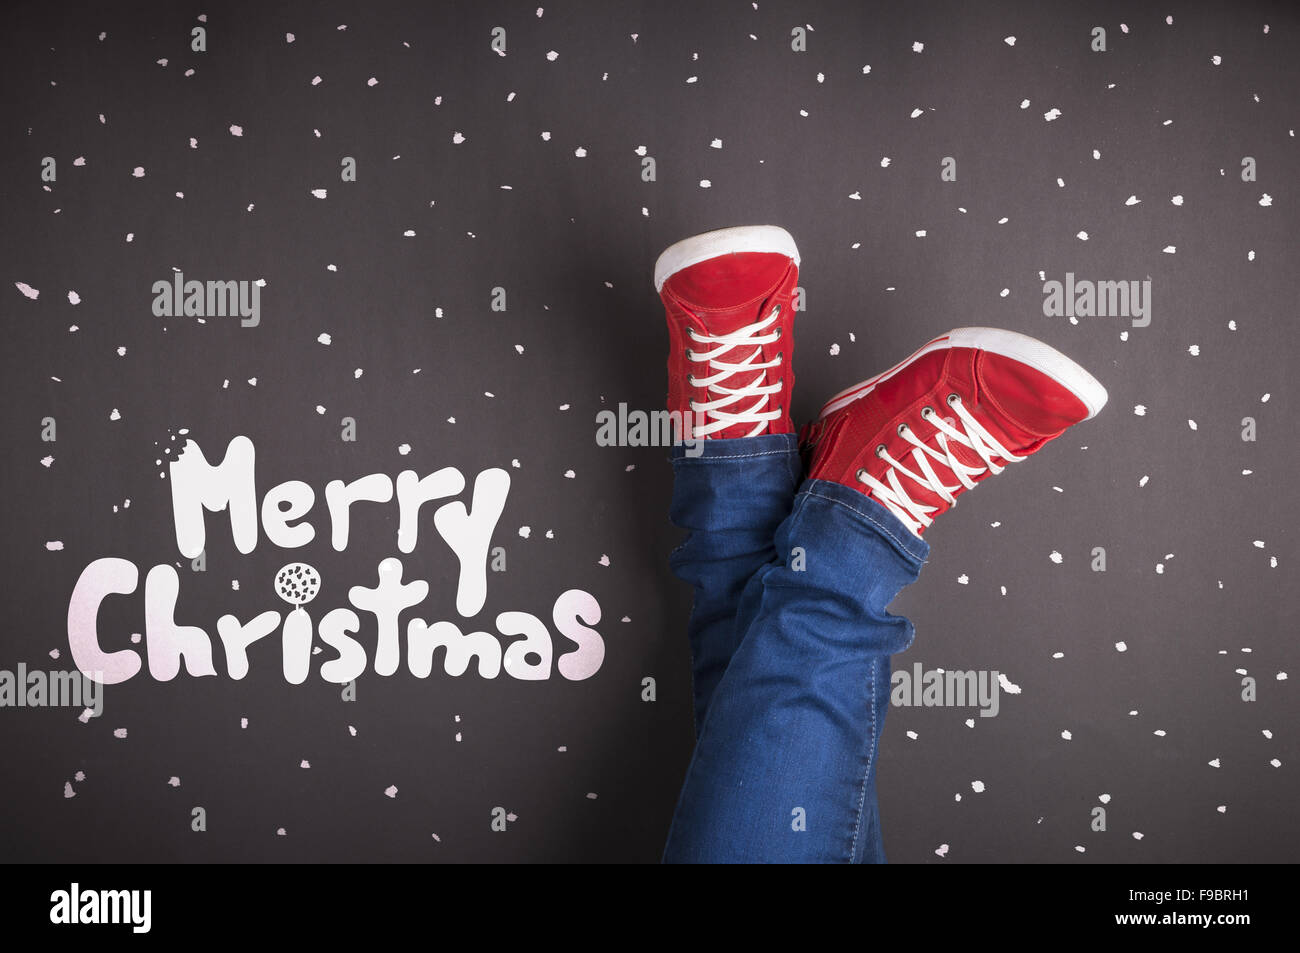 Christmas concept with red shoes and white chalk Stock Photo